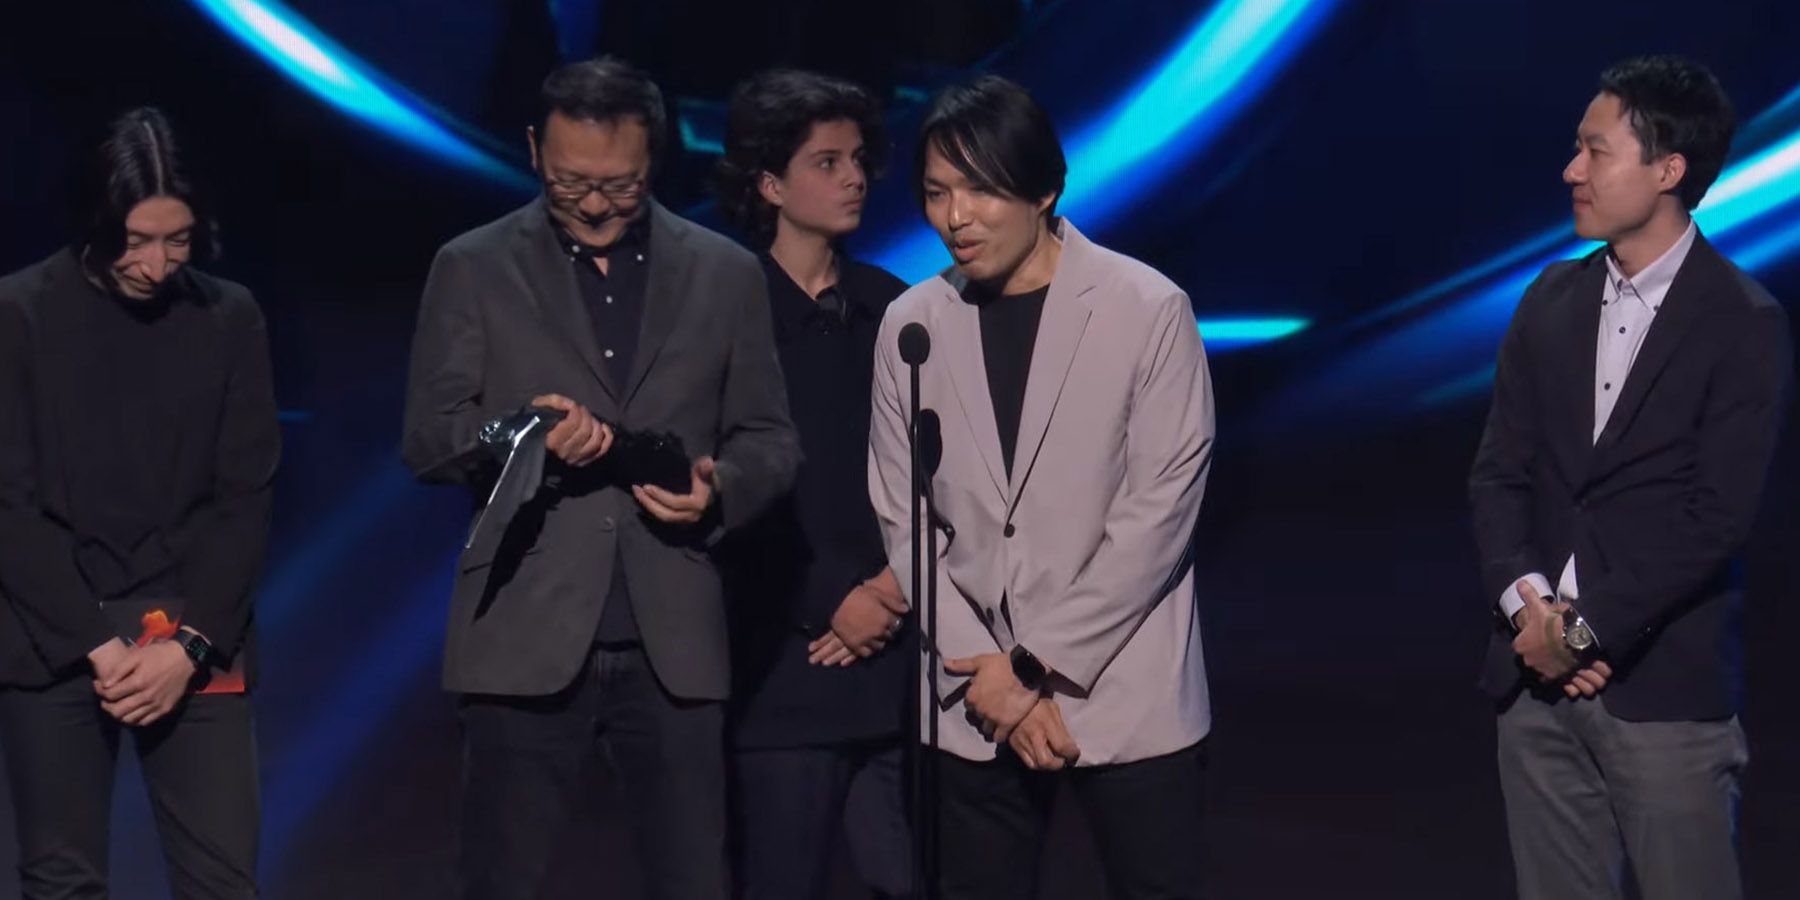 Meet the 15-year-old prankster who crashed the Game Awards - Polygon